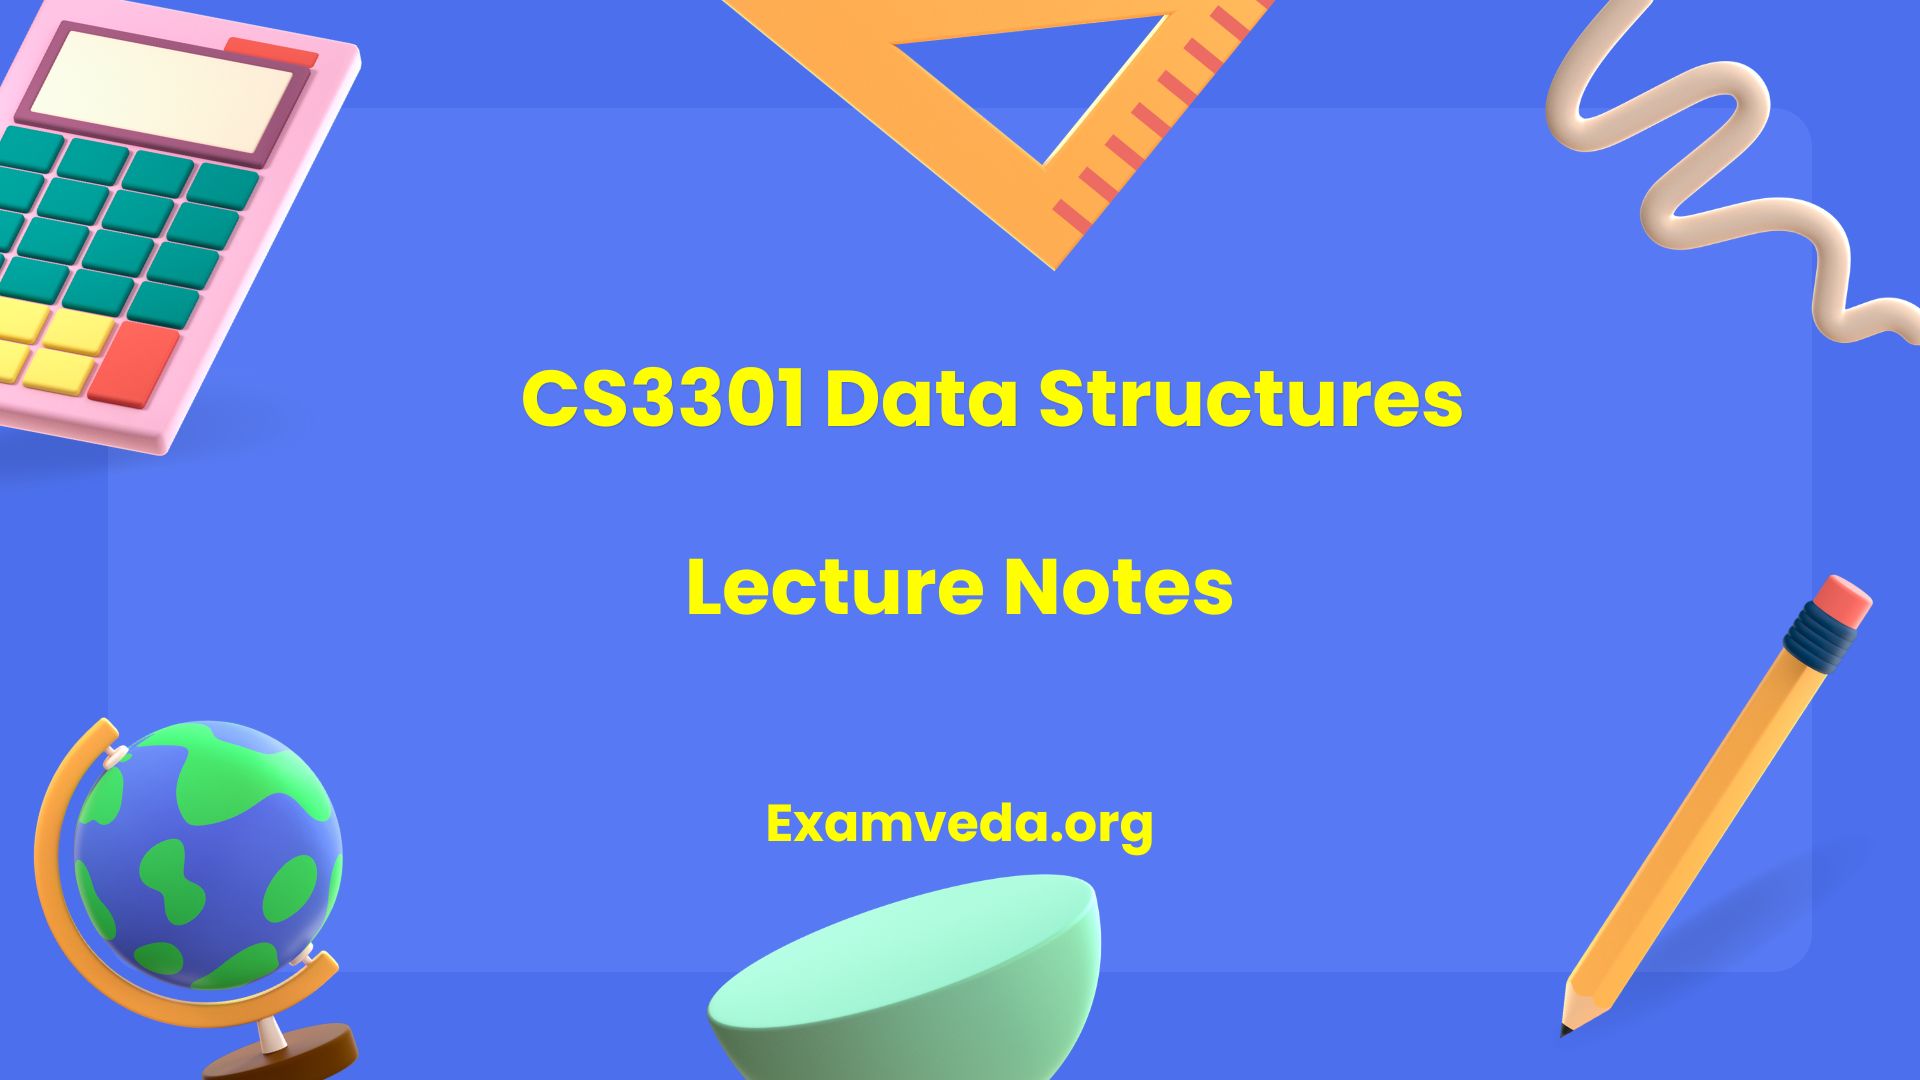 CS3301 Data Structures Lecture Notes